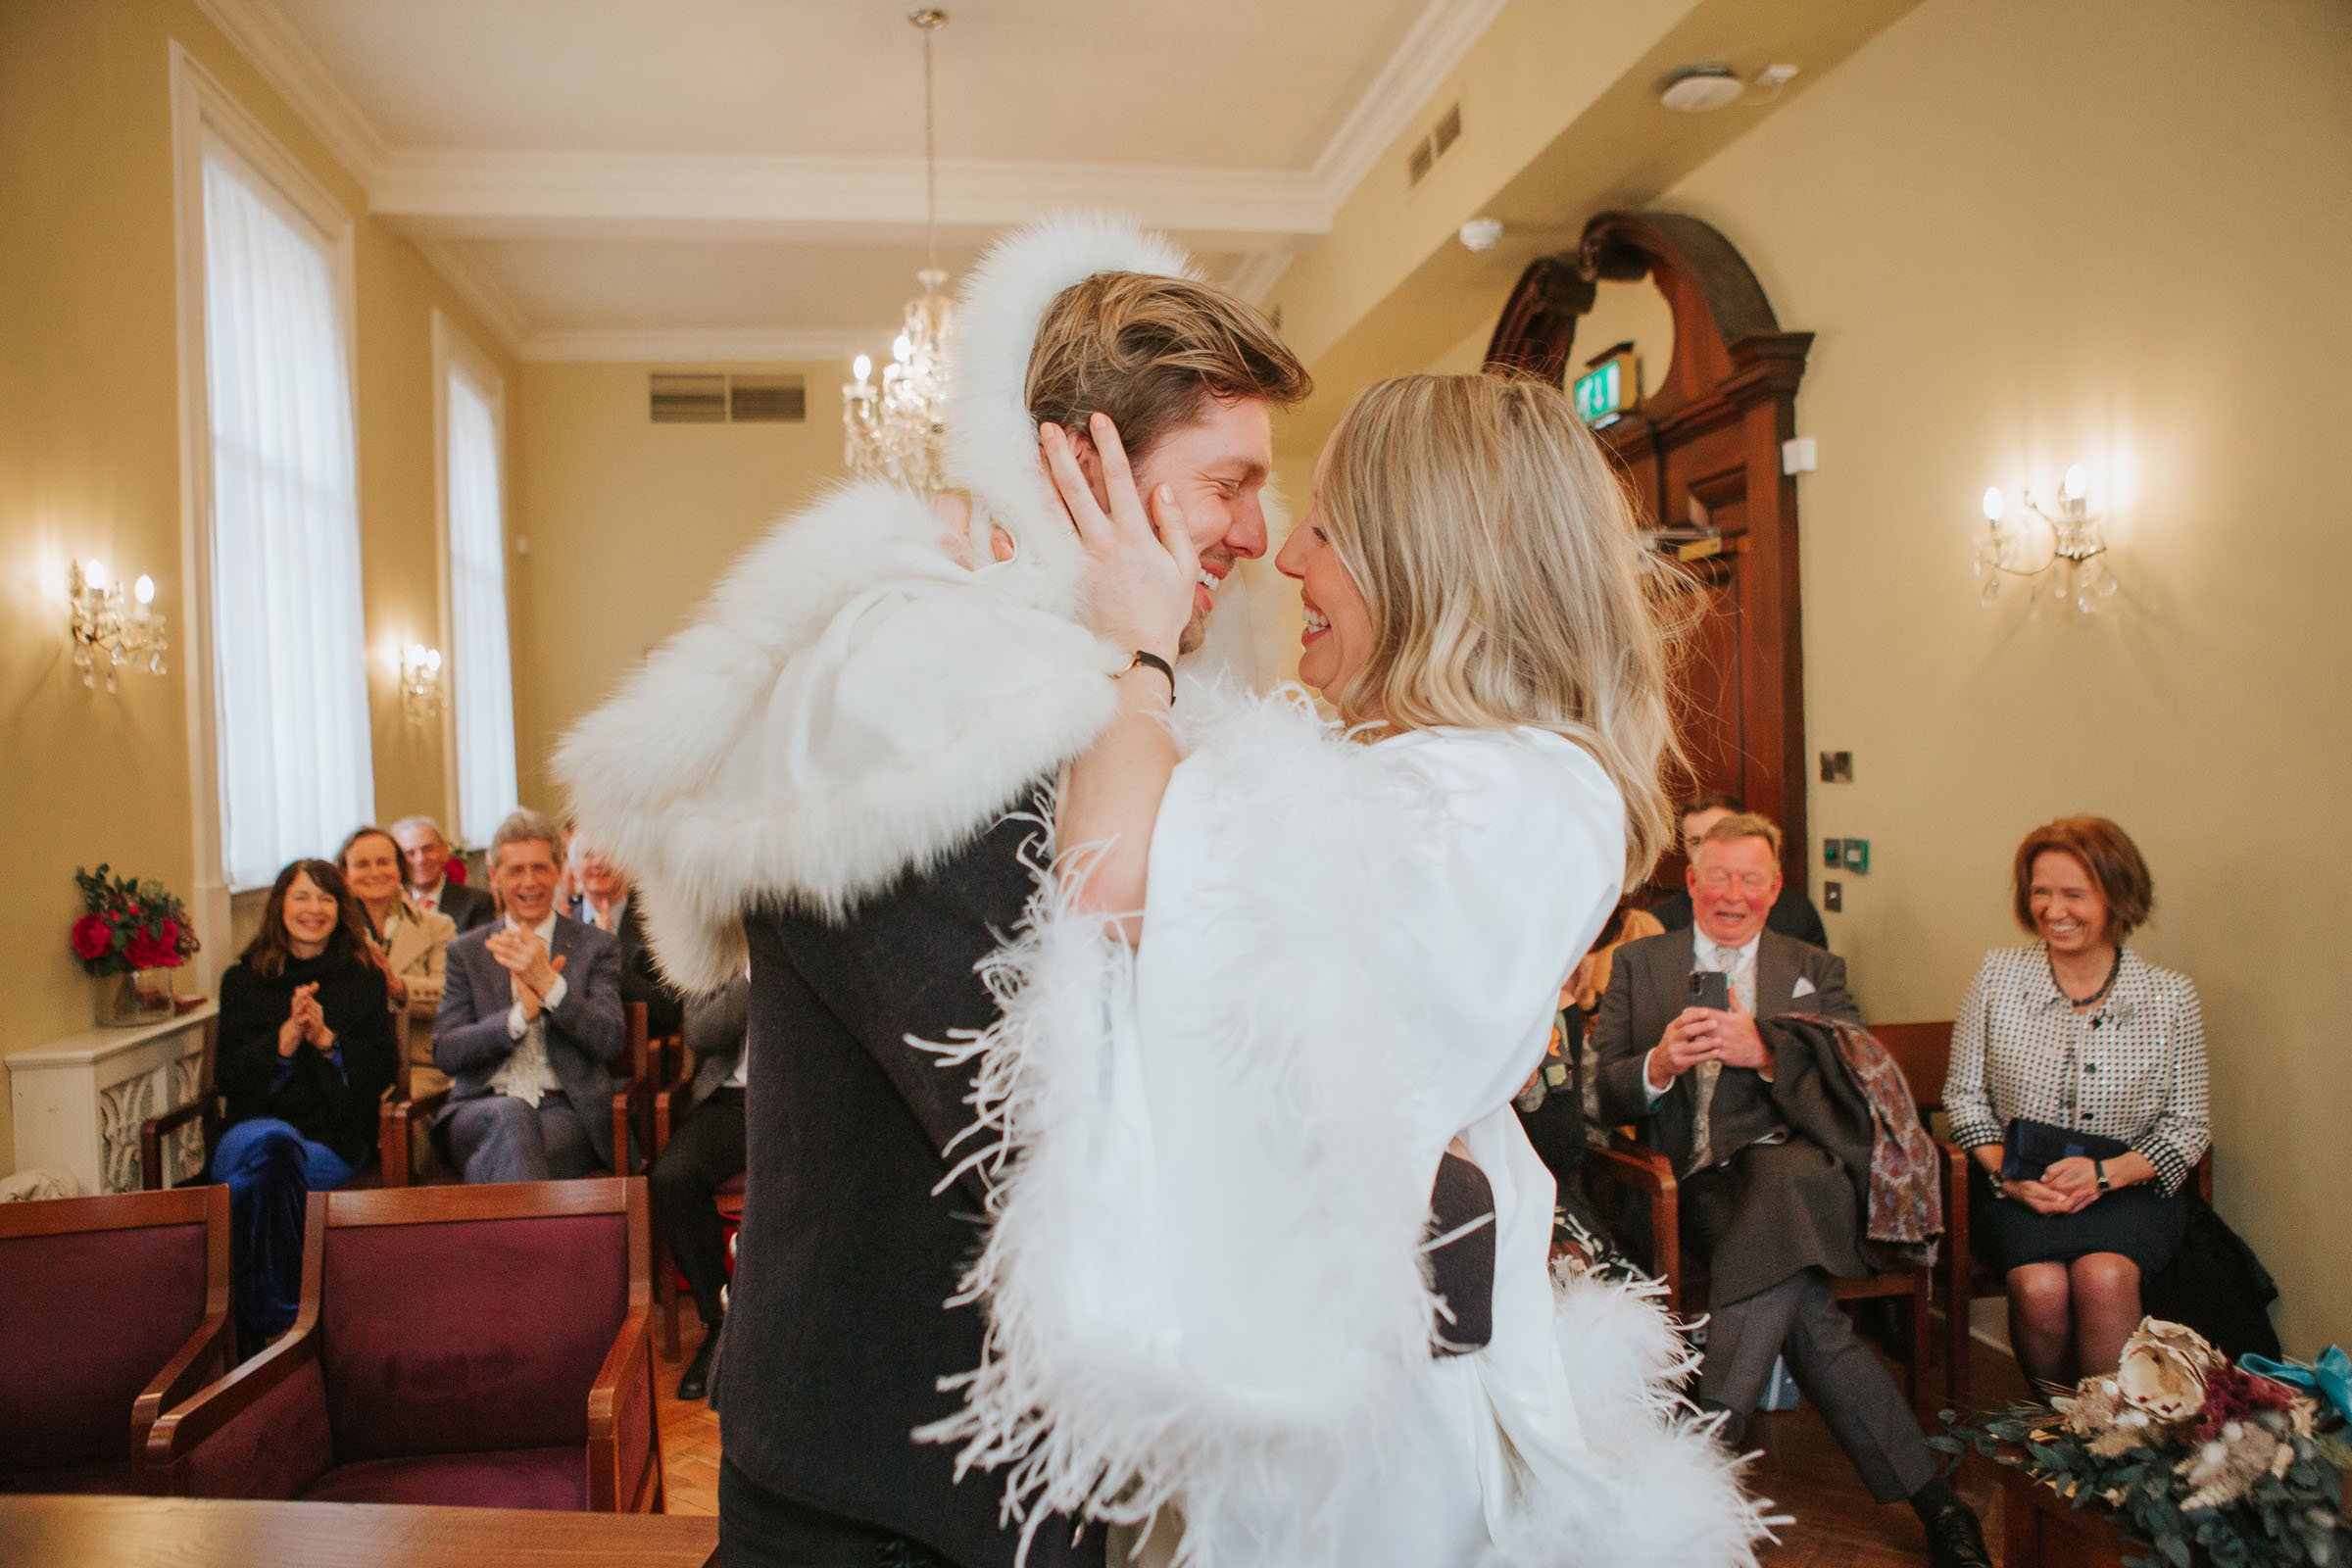  Lizzie and Max about to kiss in their wedding ceremony in front of their friends and family in The Byron Room at Chelsea Old Town Hall. 